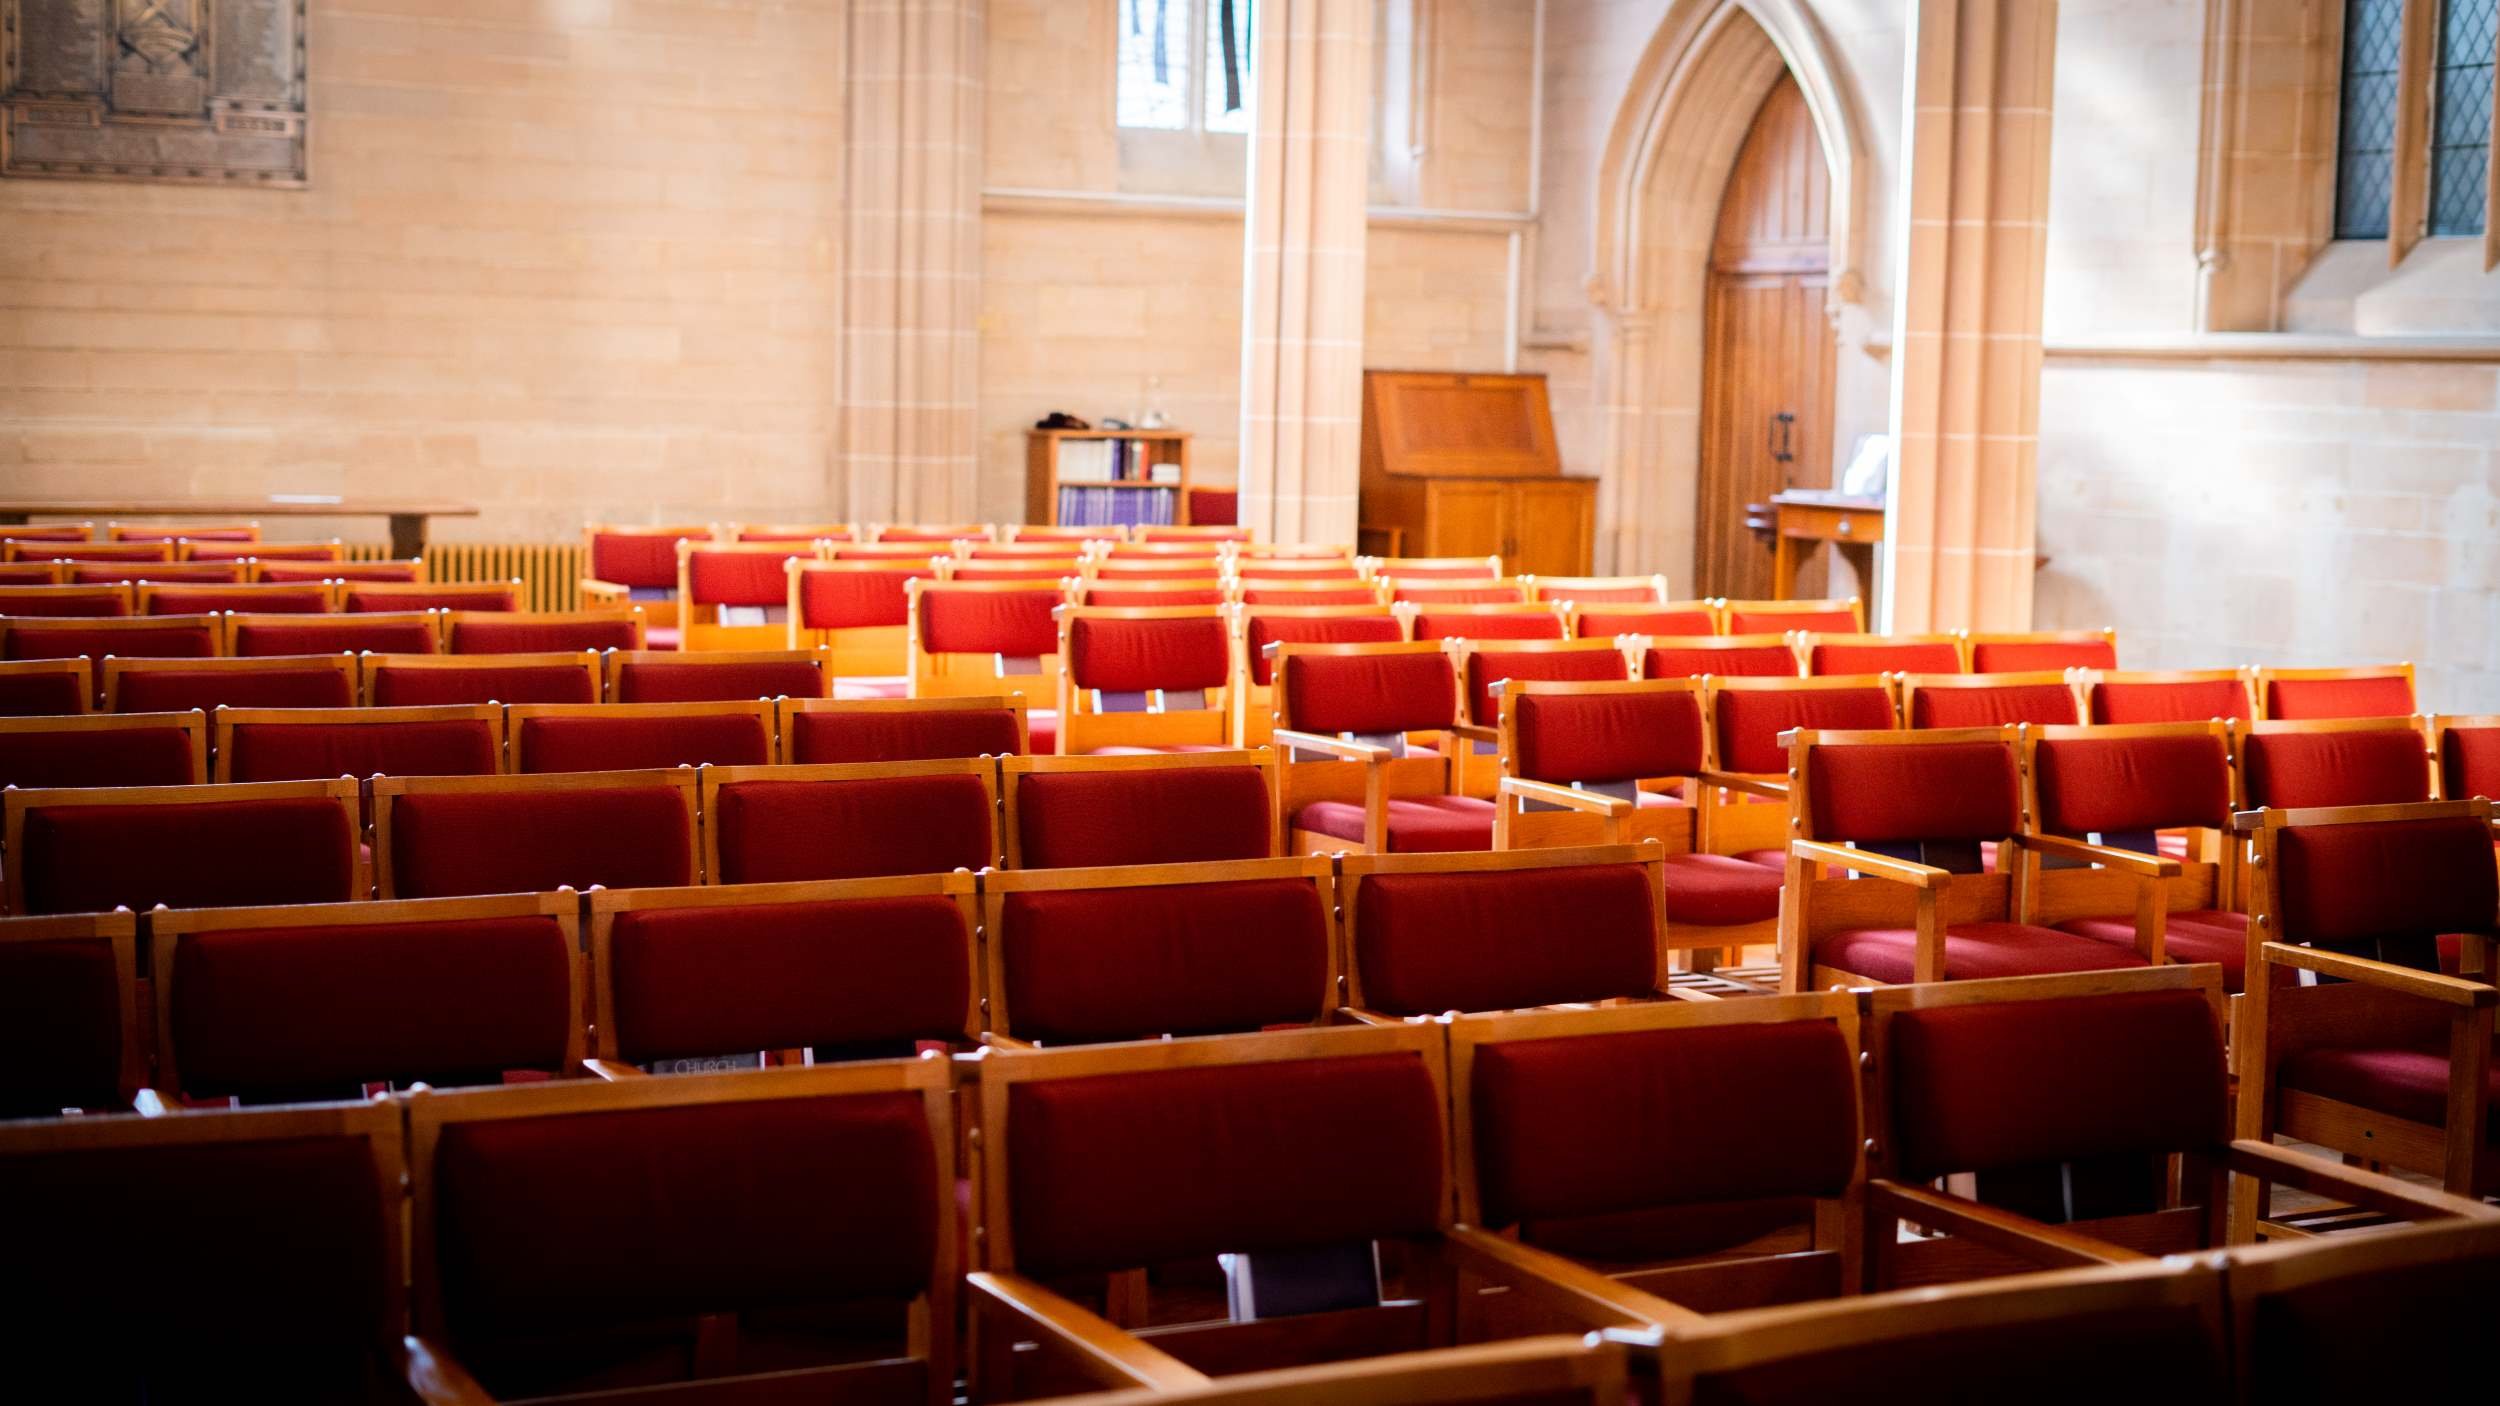 Looking at the seating in the Sanctuary